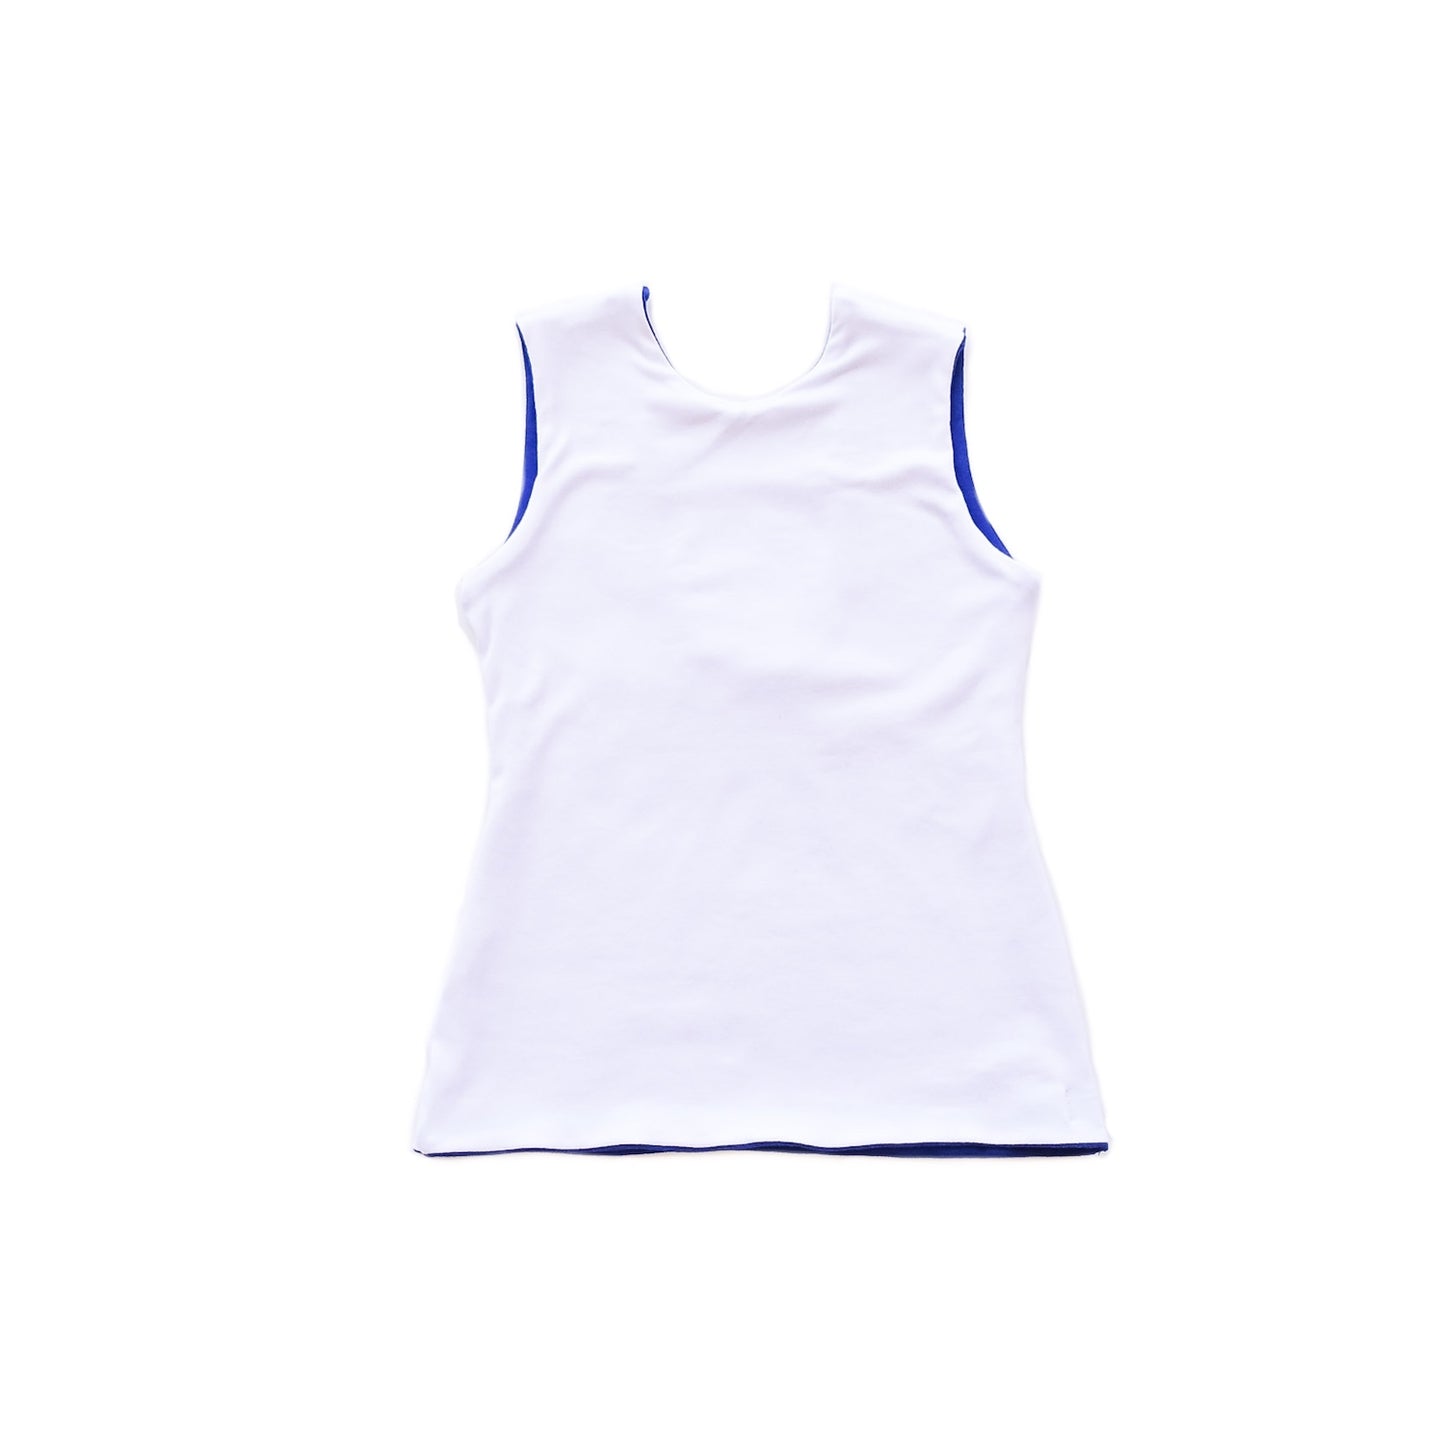 Fitted Top - Blue/White (Reversible)